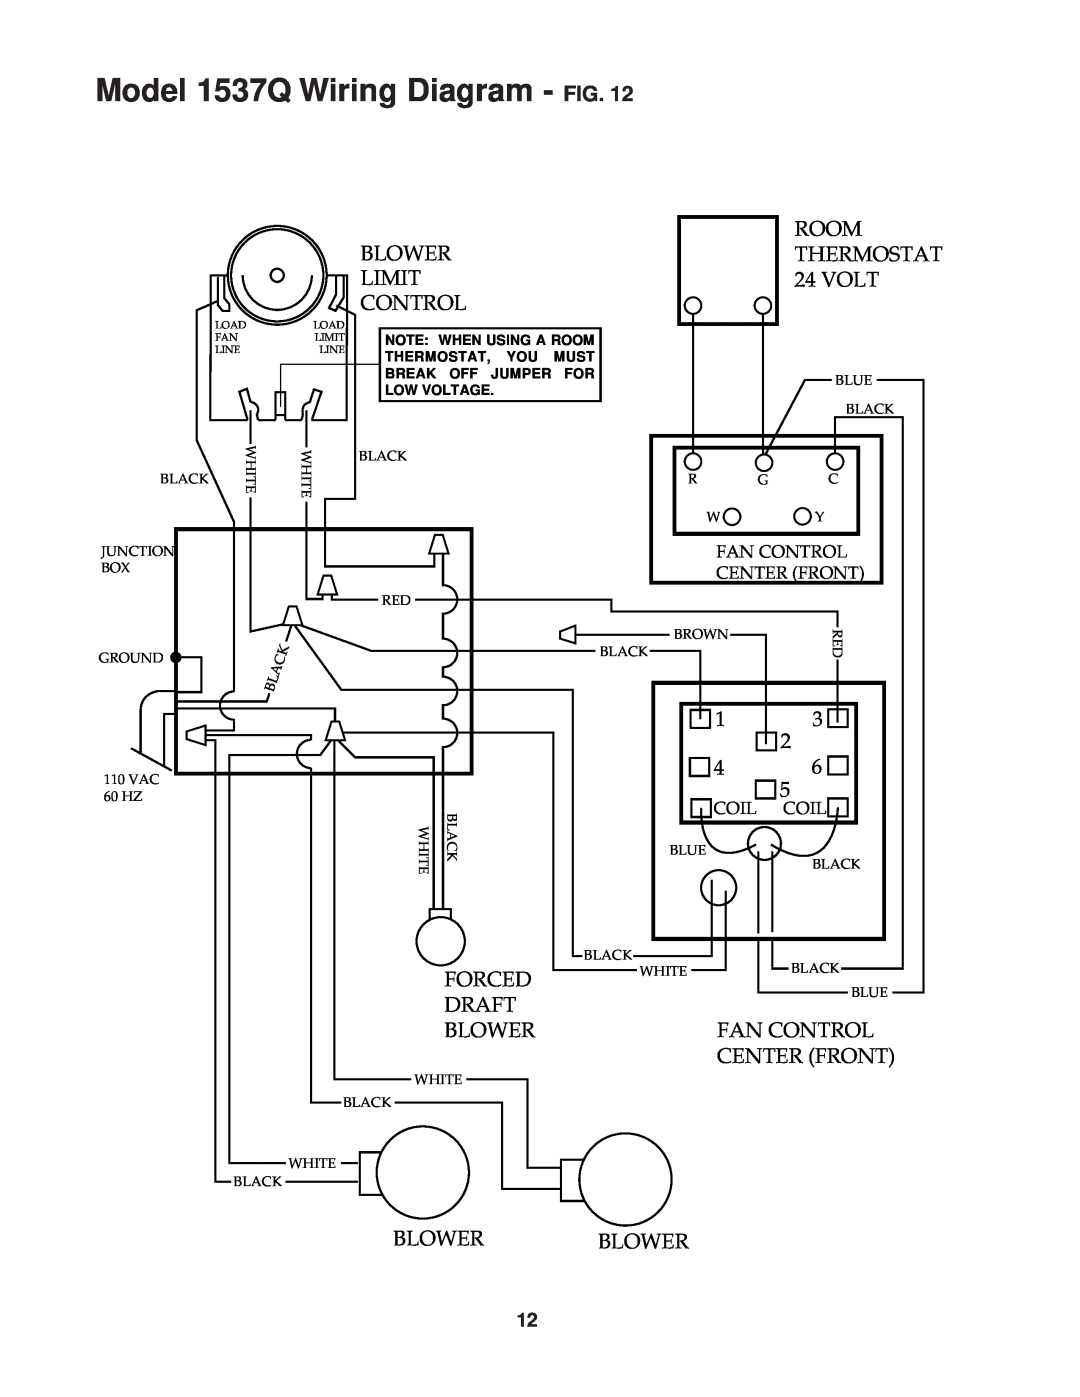 United States Stove Model 1537Q Wiring Diagram - FIG, Blower Limit Control, ROOM THERMOSTAT 24 VOLT, 13 2, Coil Coil 